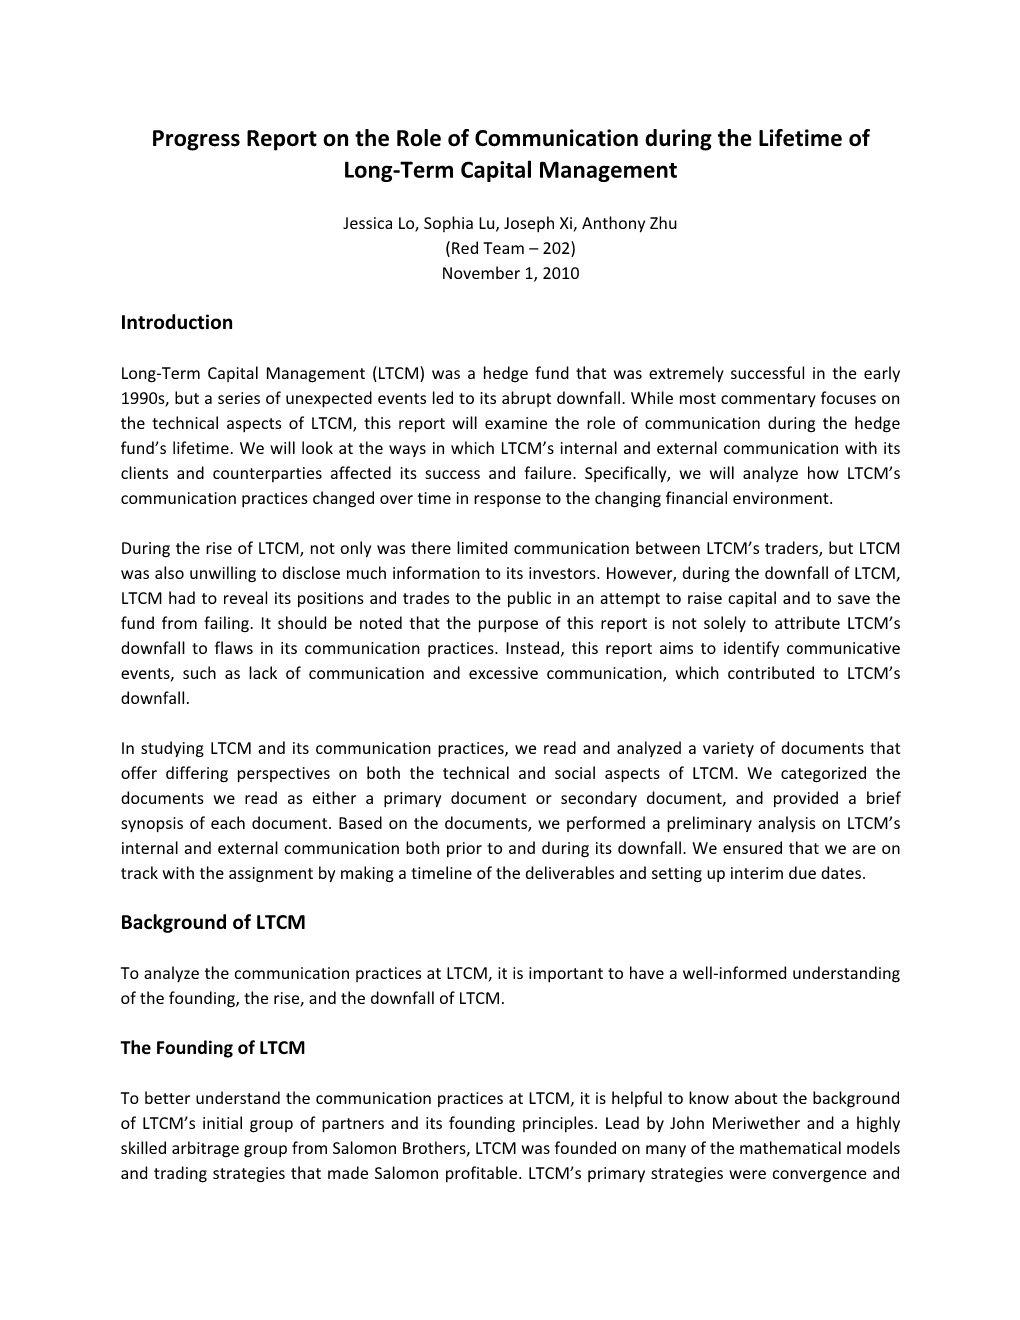 Progress Report on the Role of Communication During the Lifetime of Long‐Term Capital Management